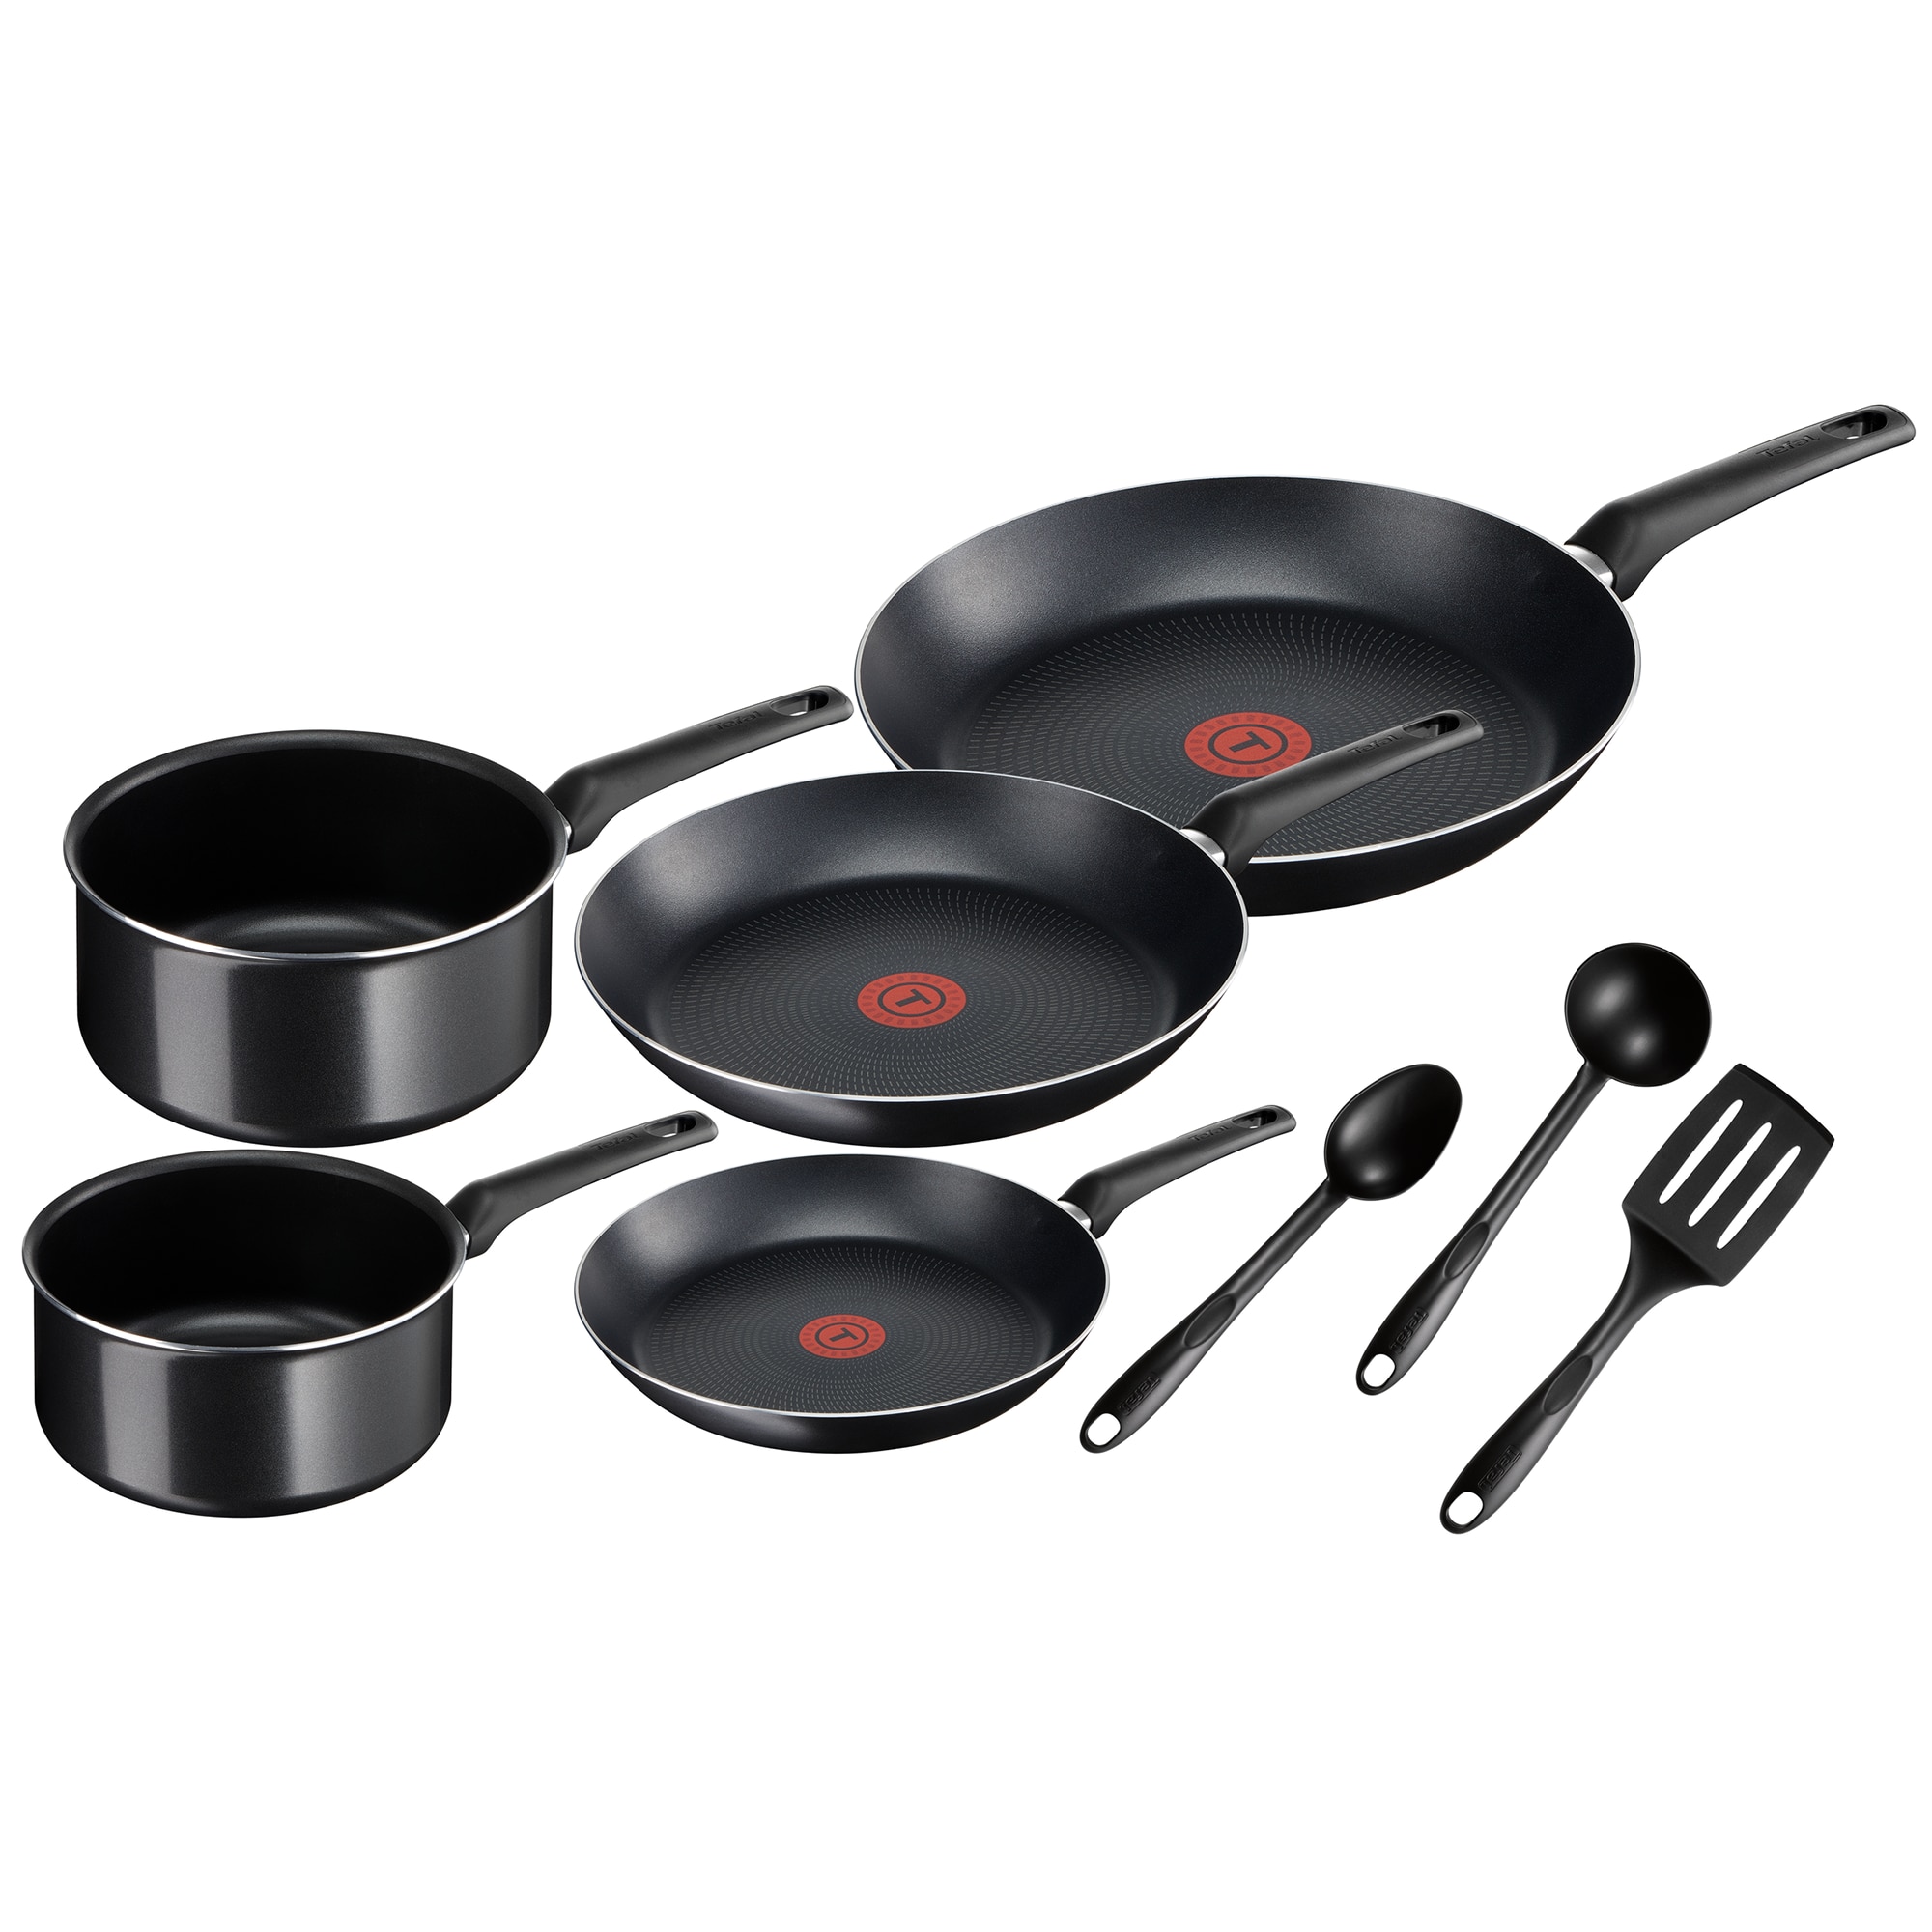 Nationwide Calamity Watery Set tigai si cratite Tefal, 8 piese - eMAG.ro